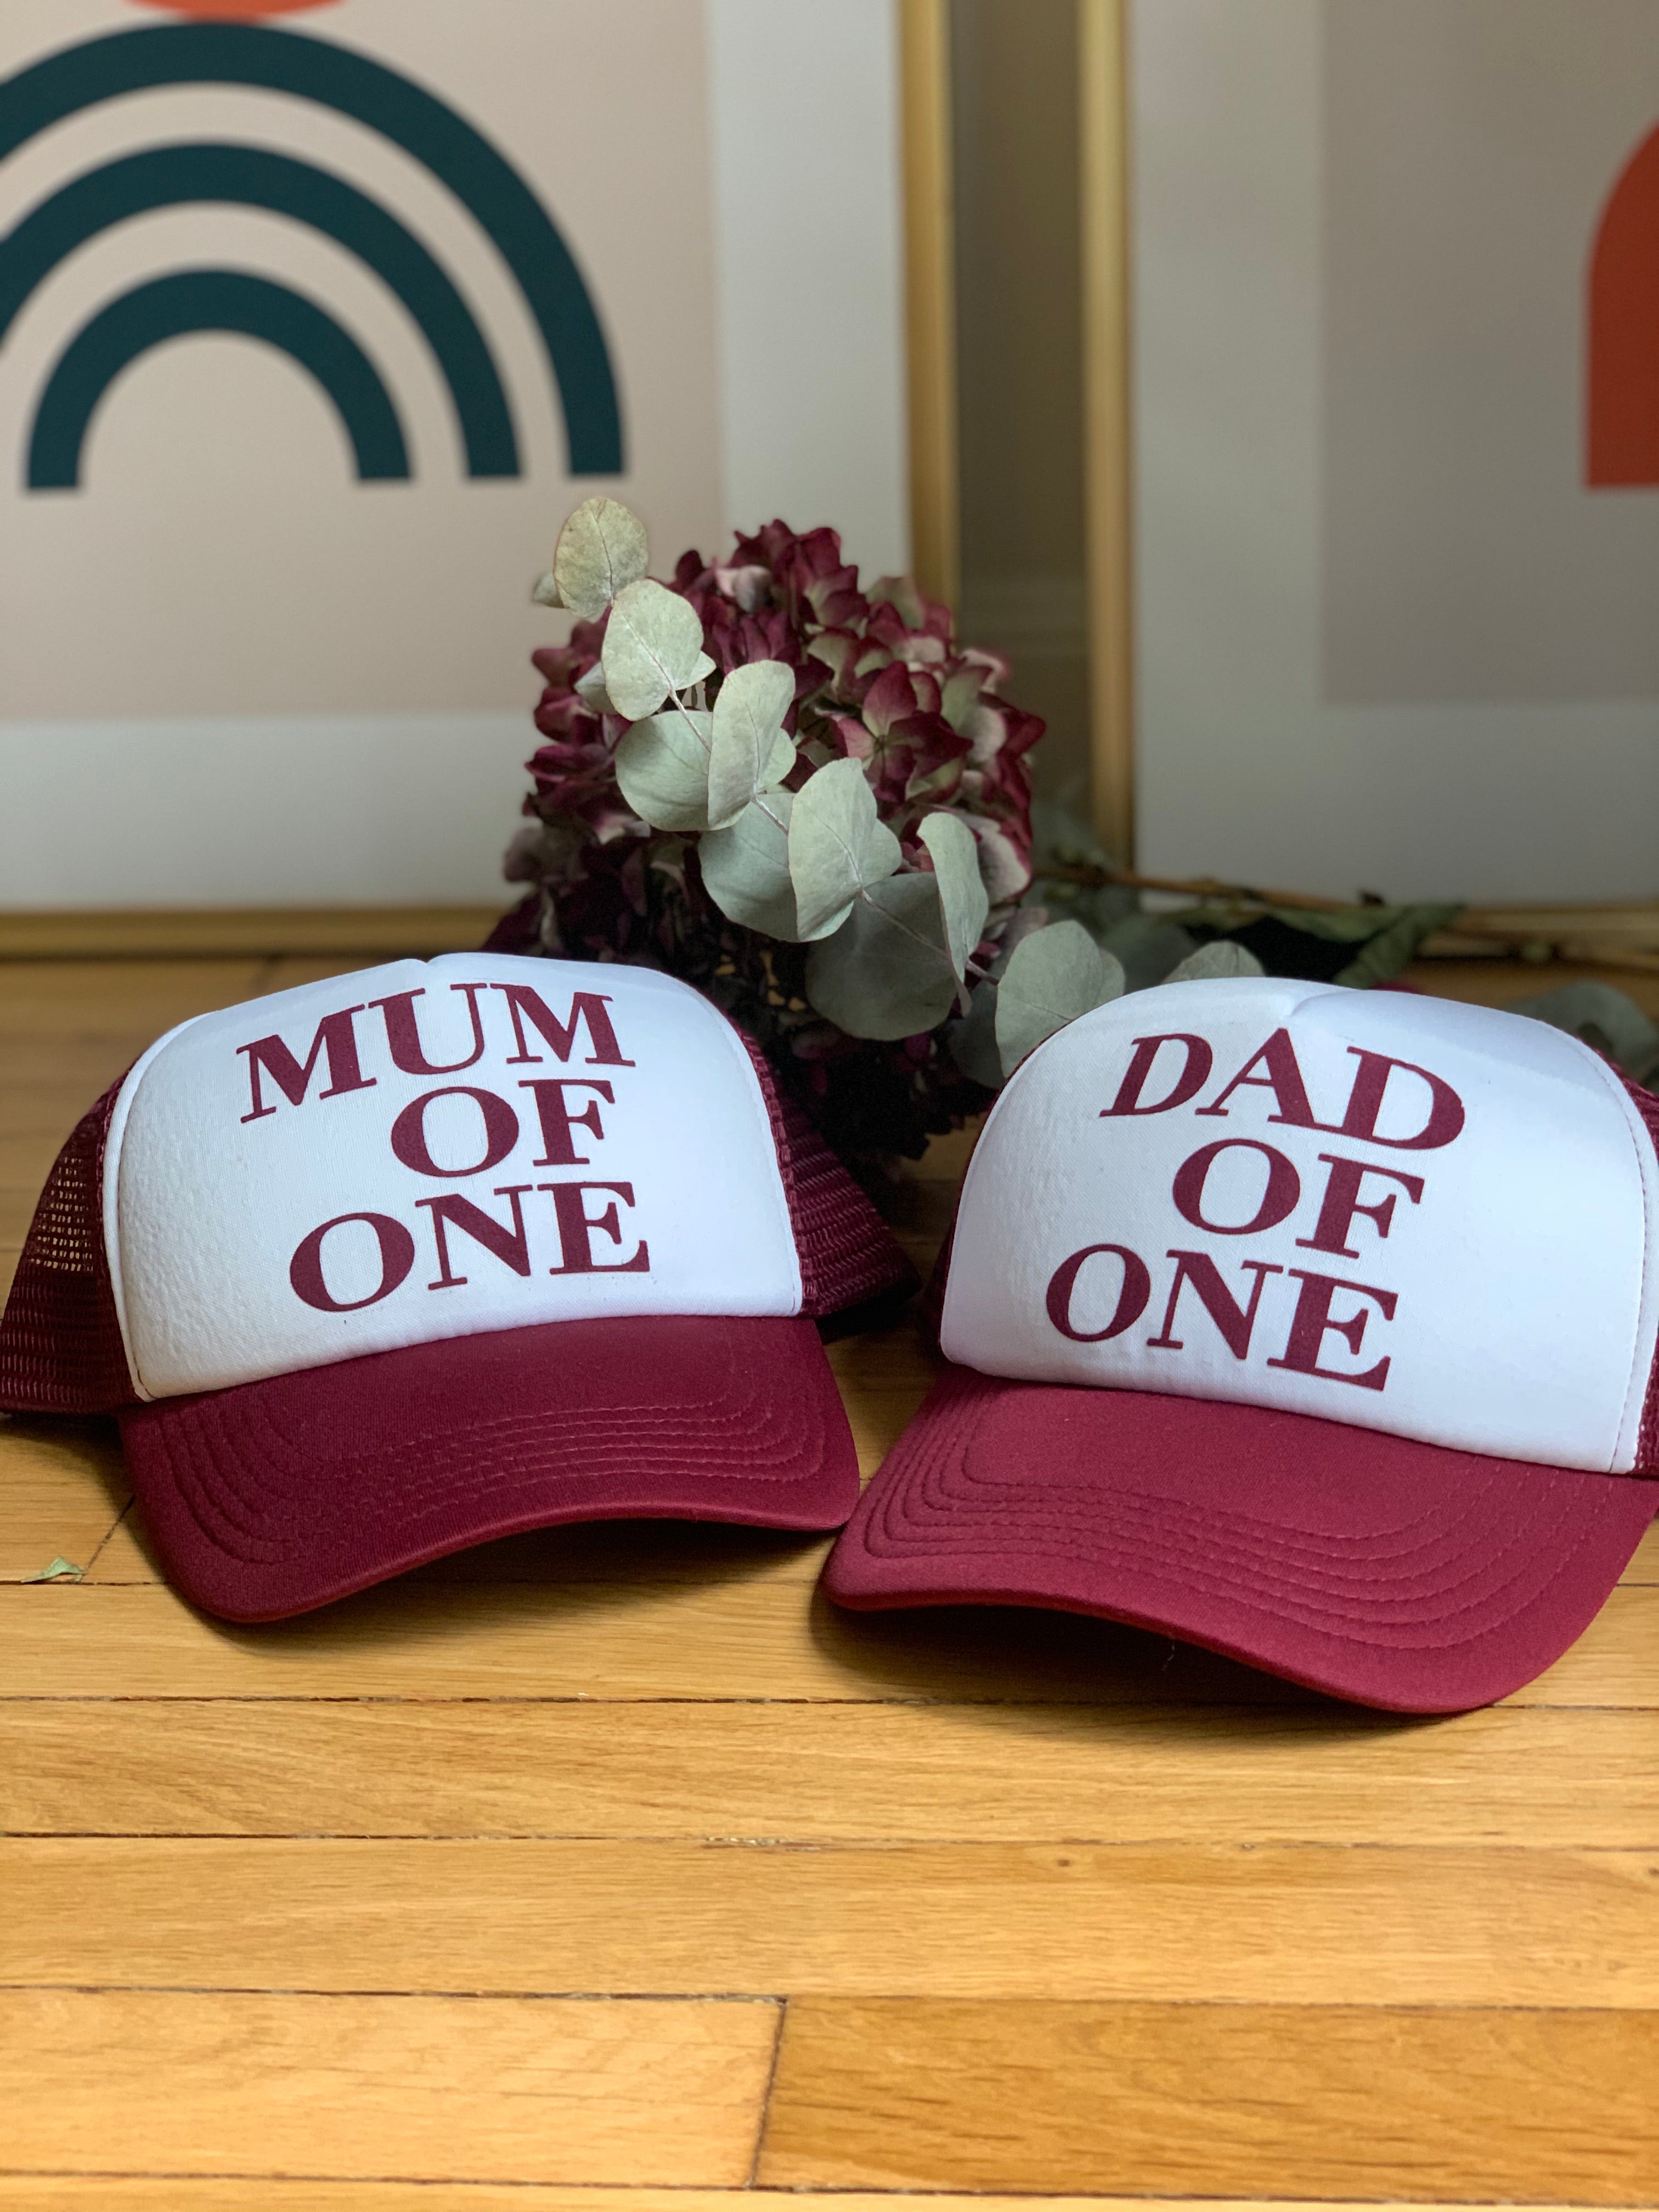 DAD OF CAP - BORDEAUX RED AND WHITE - Available for DAD OF ONE, TWO, THREE...